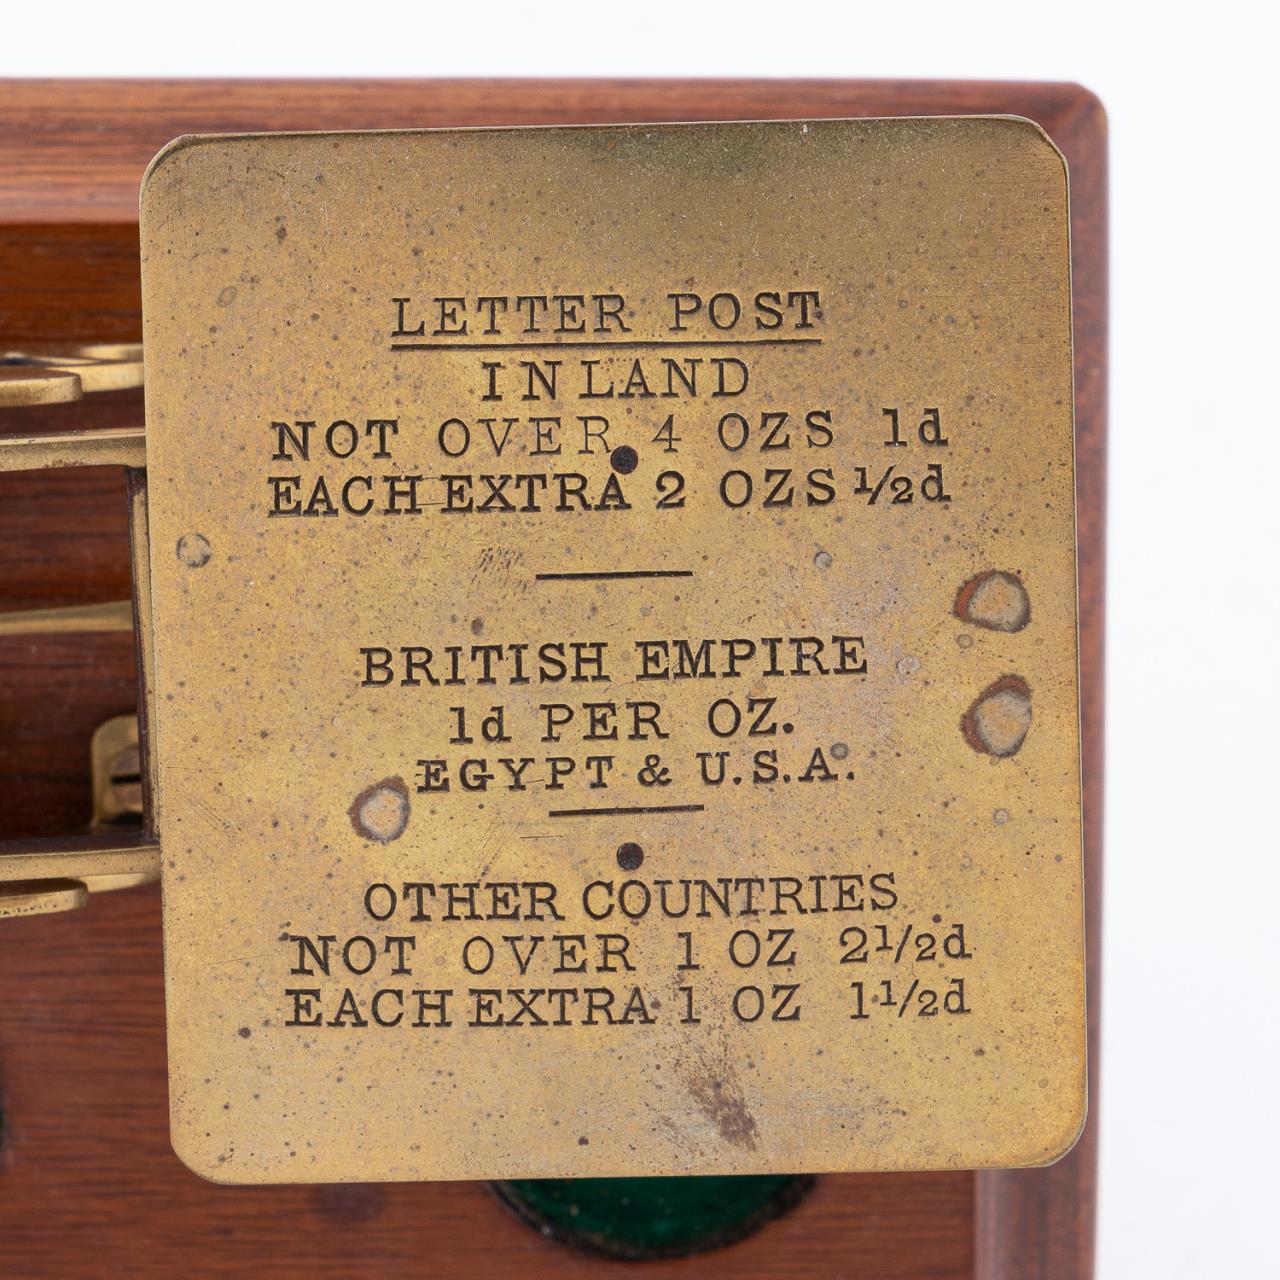 S. MORDAN & CO. LATE 19TH C. BRITISH POSTAL SCALE - Image 7 of 7